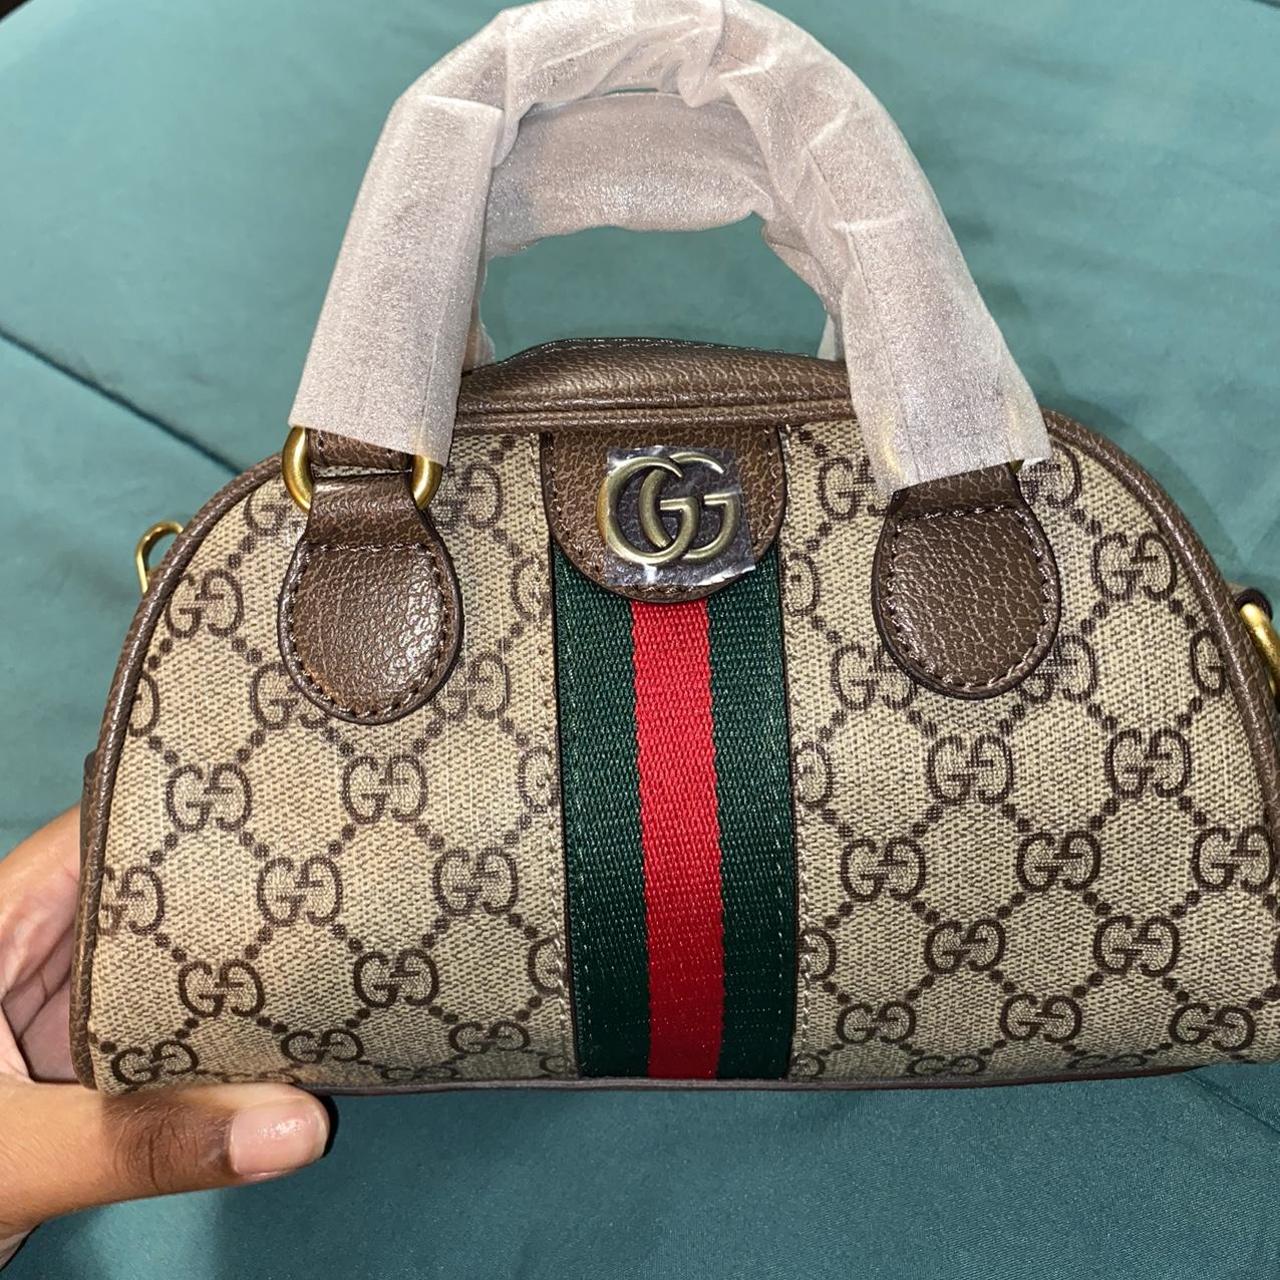 Gucci Red Leather Tote Bag Chain Handle ❌ PRICE - Depop